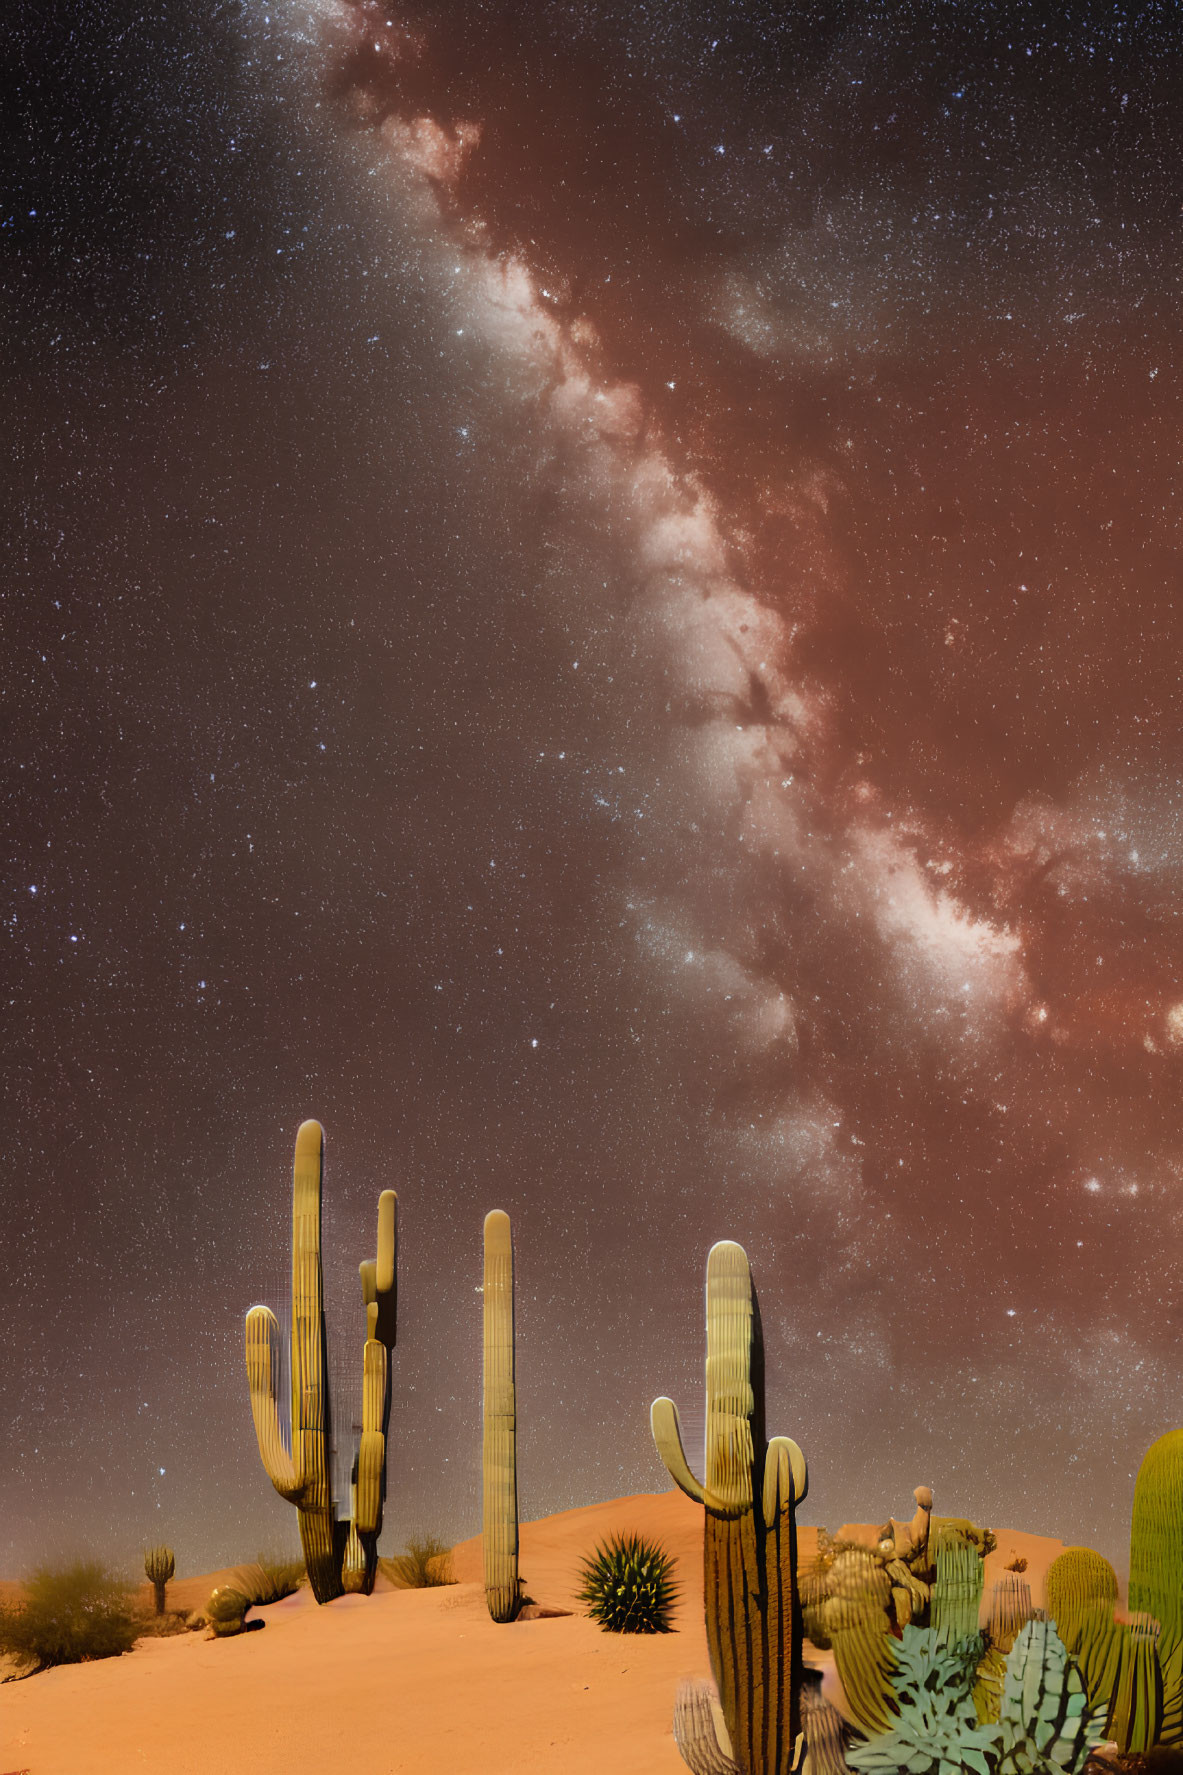 Starry Night Sky Over Desert Landscape with Tall Cacti